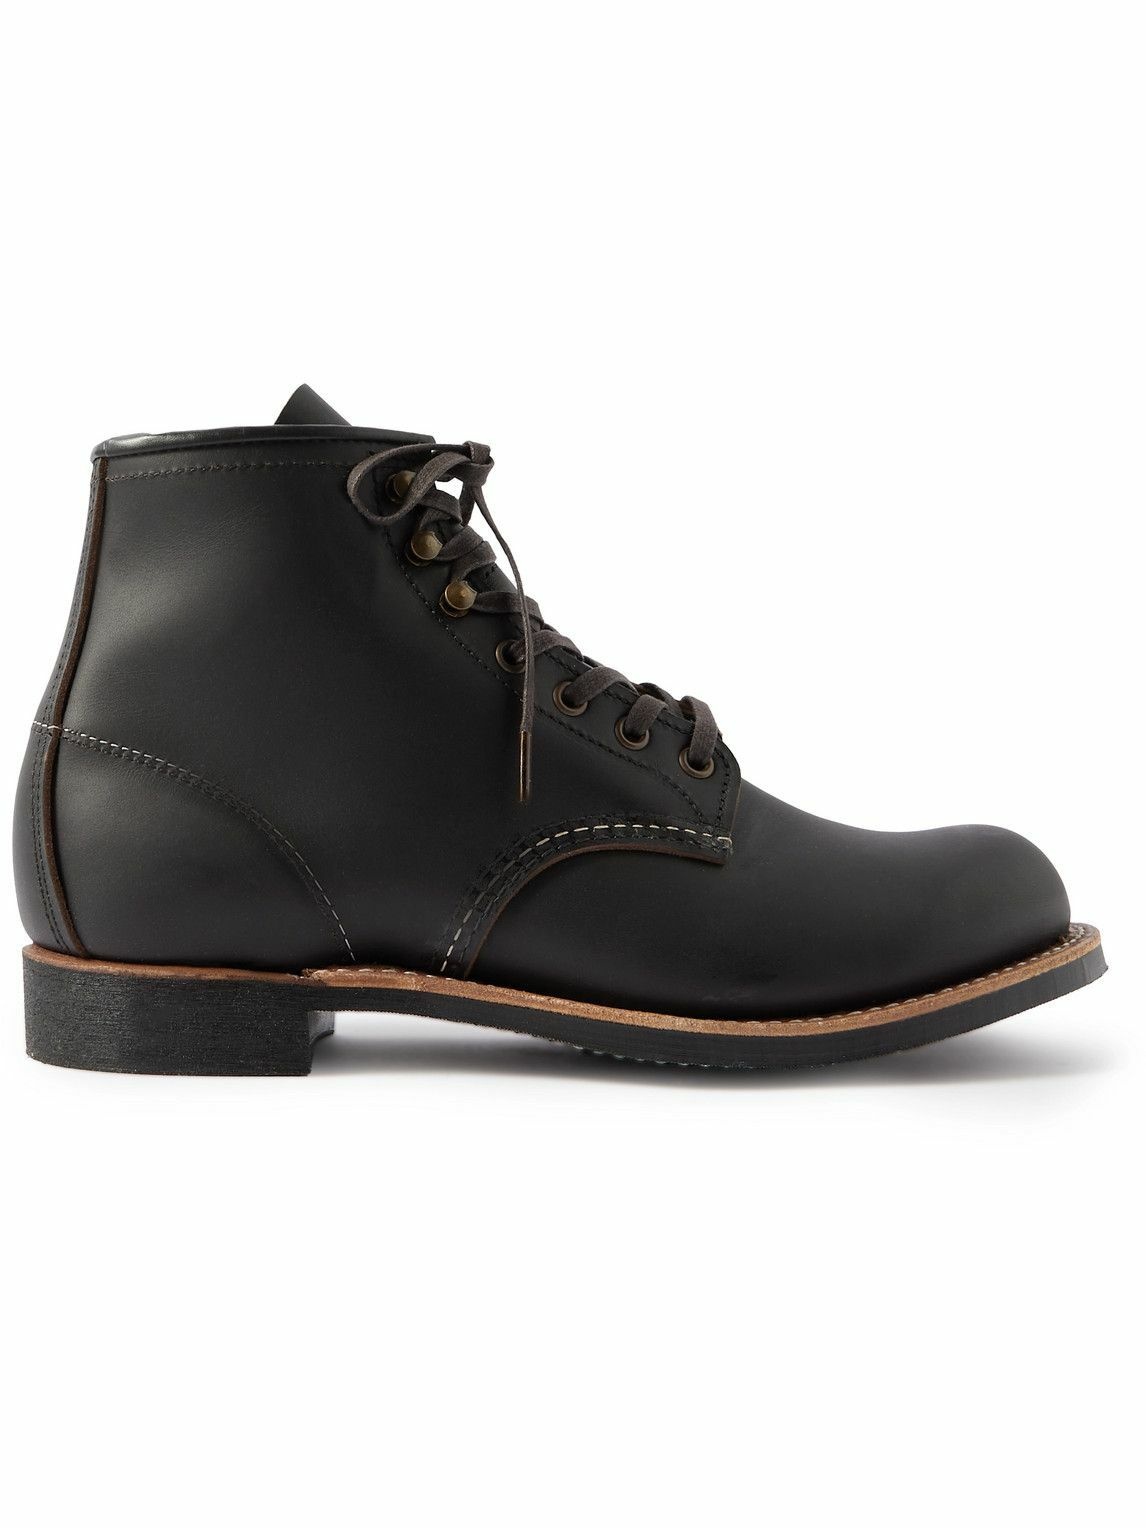 Red Wing Shoes - Blacksmith Leather Boots - Black Red Wing Shoes